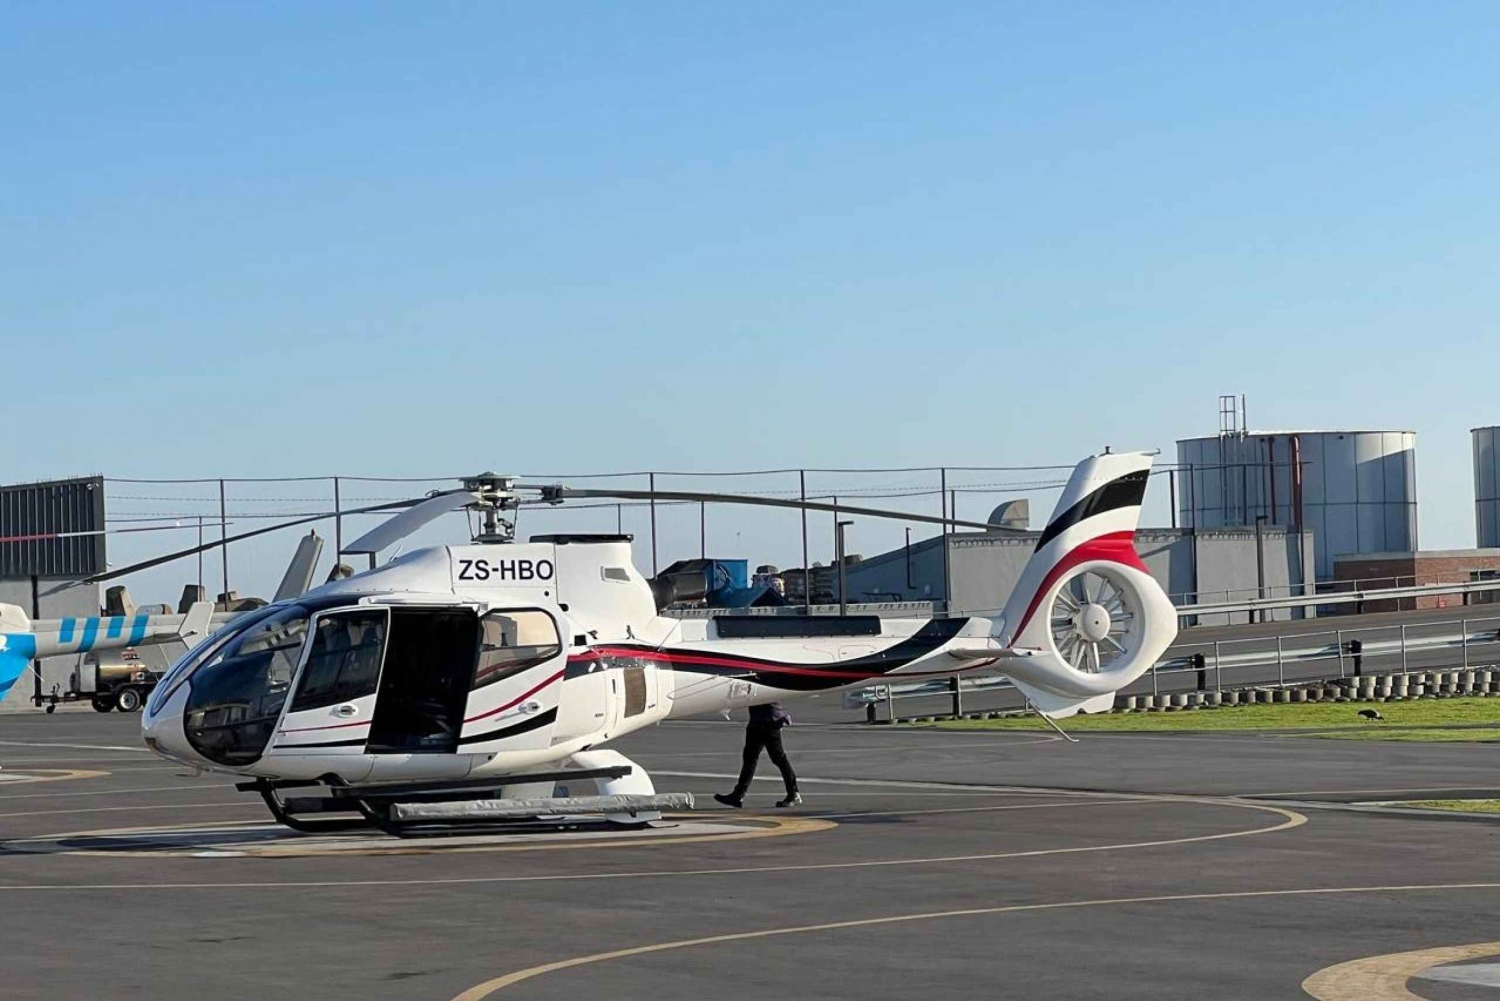 A 50-minute Helicopter Tour of the Franschhoek Wine Region